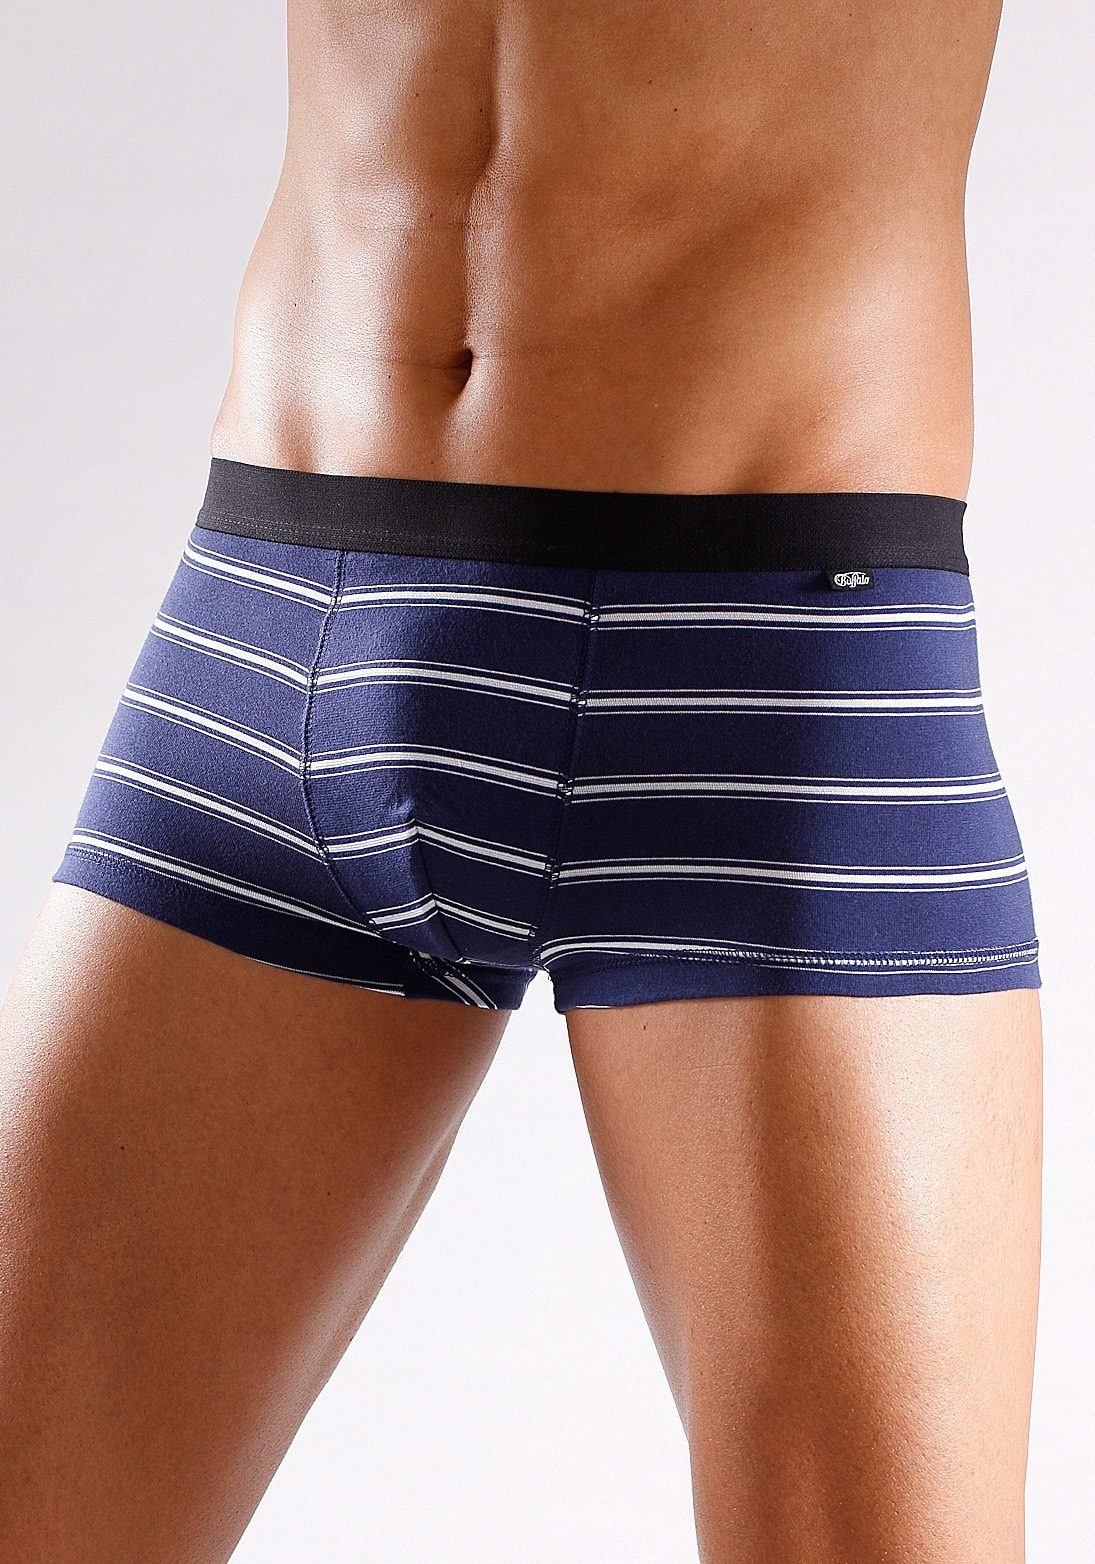 Buffalo Boxershorts, (Packung, 4 St.), in Hipster-Form mit elastischer Baumwolle, Â»Cotton made in AfricaÂ«